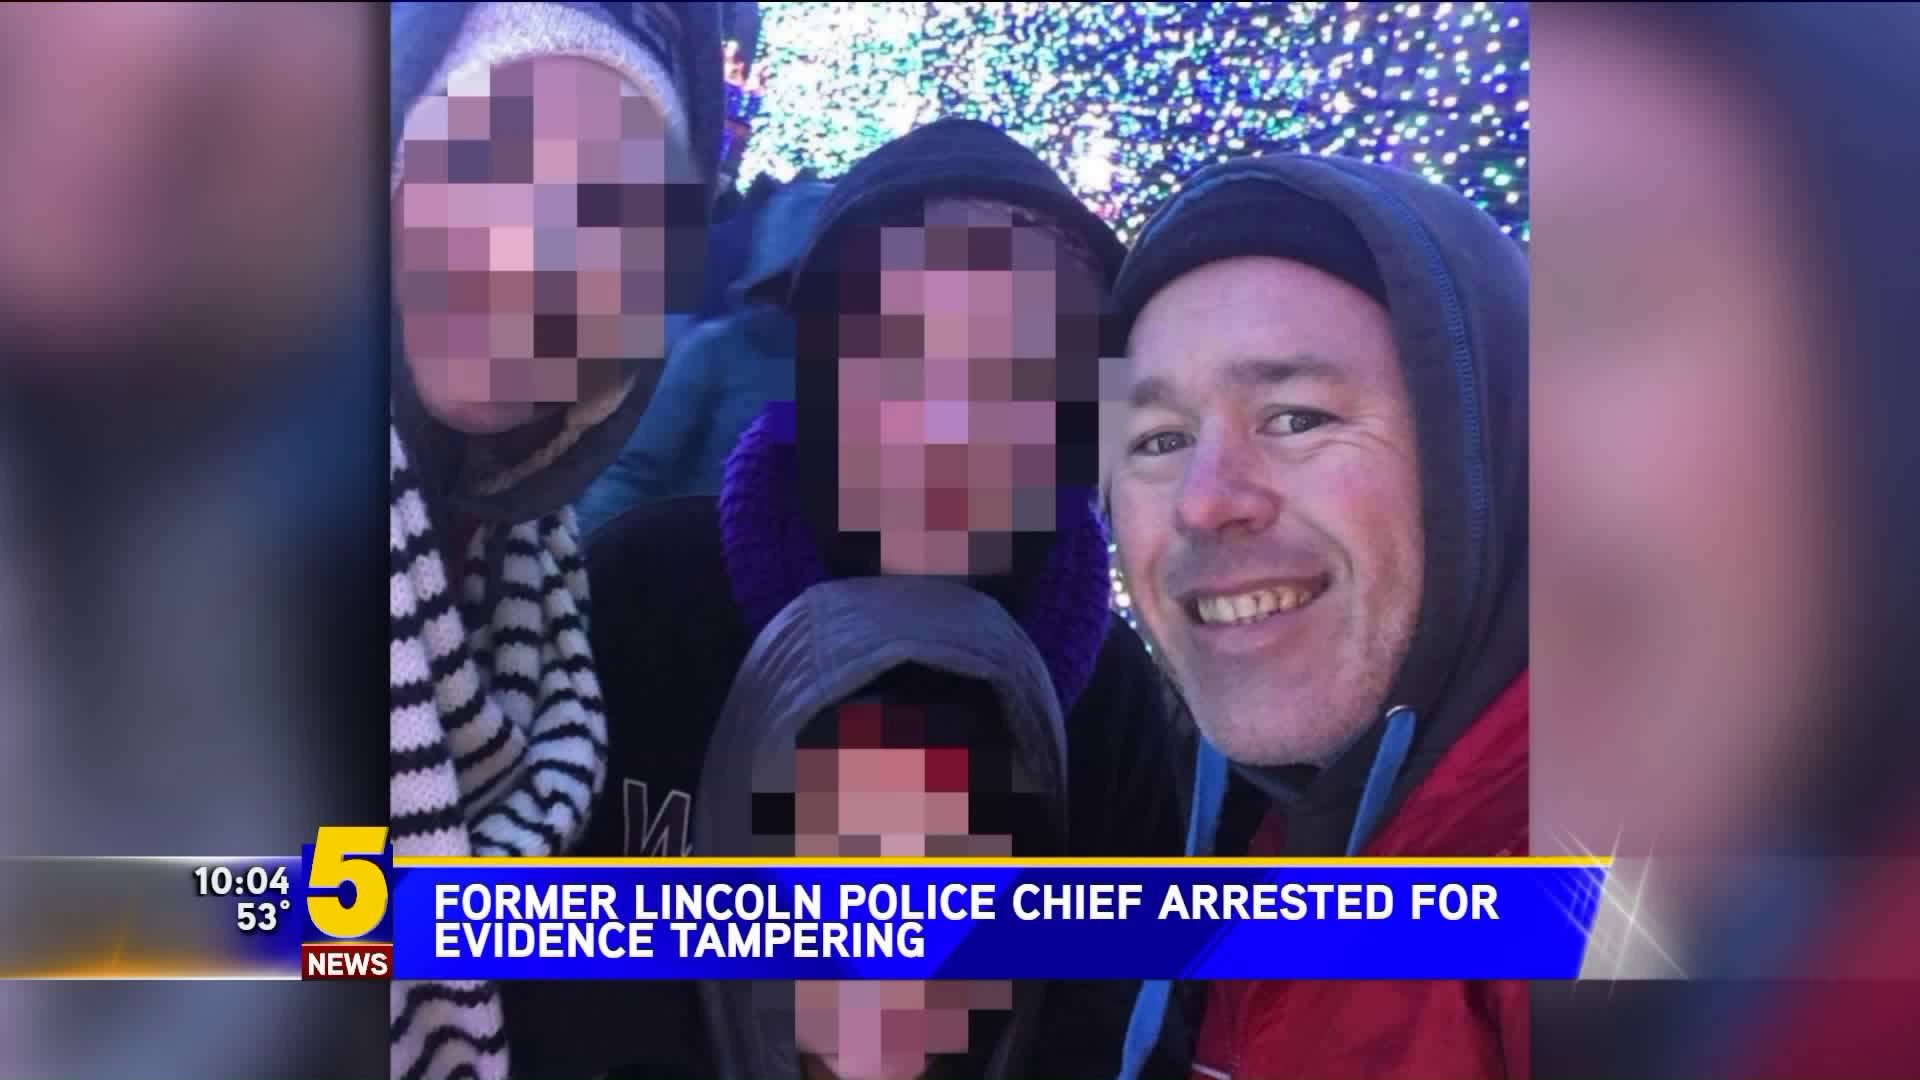 Former Lincoln Police Chief Arrested For Evidence Tampering